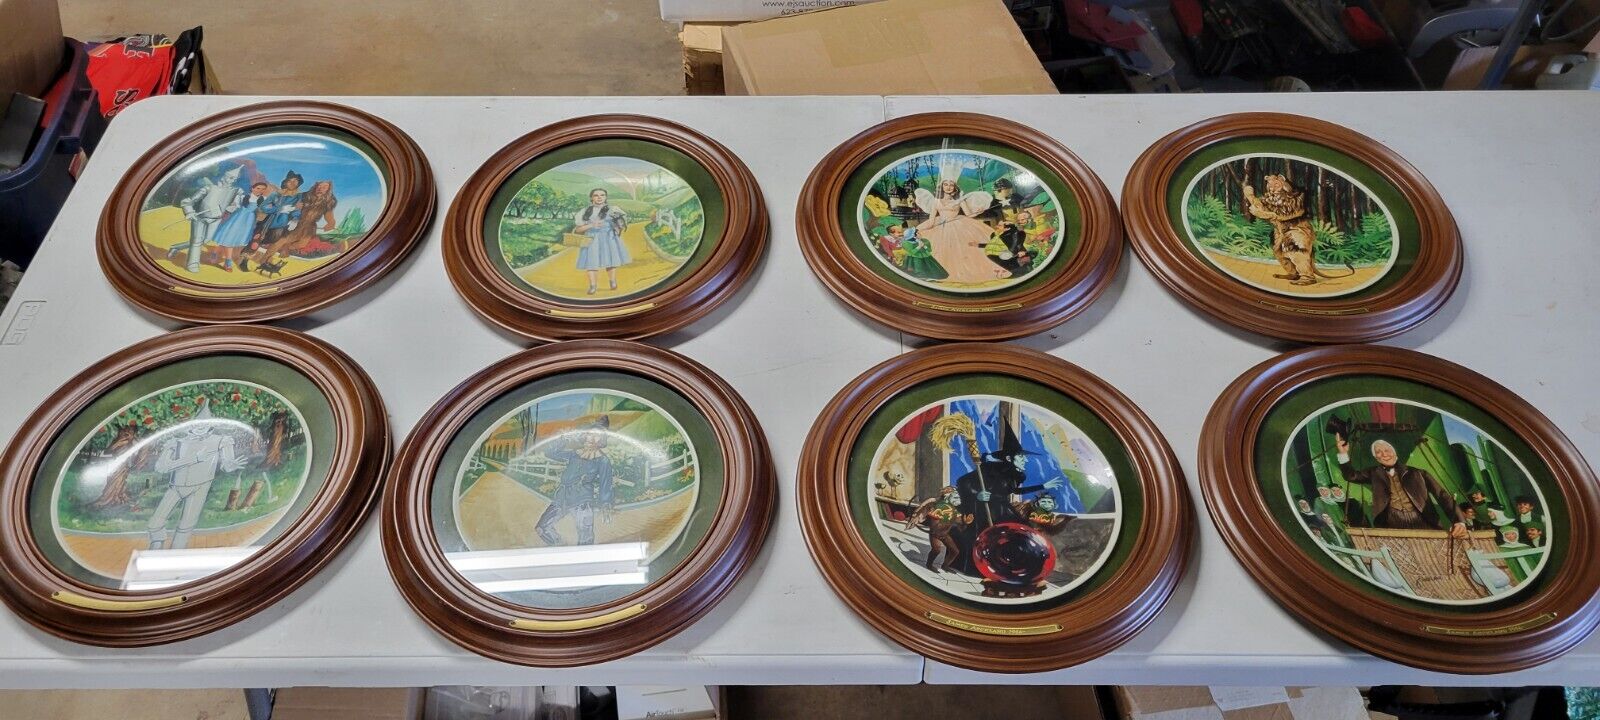 James Auckland WIZARD OF OZ, 1946. Set of 8 Knowles Plates In Walnut Frames EXC